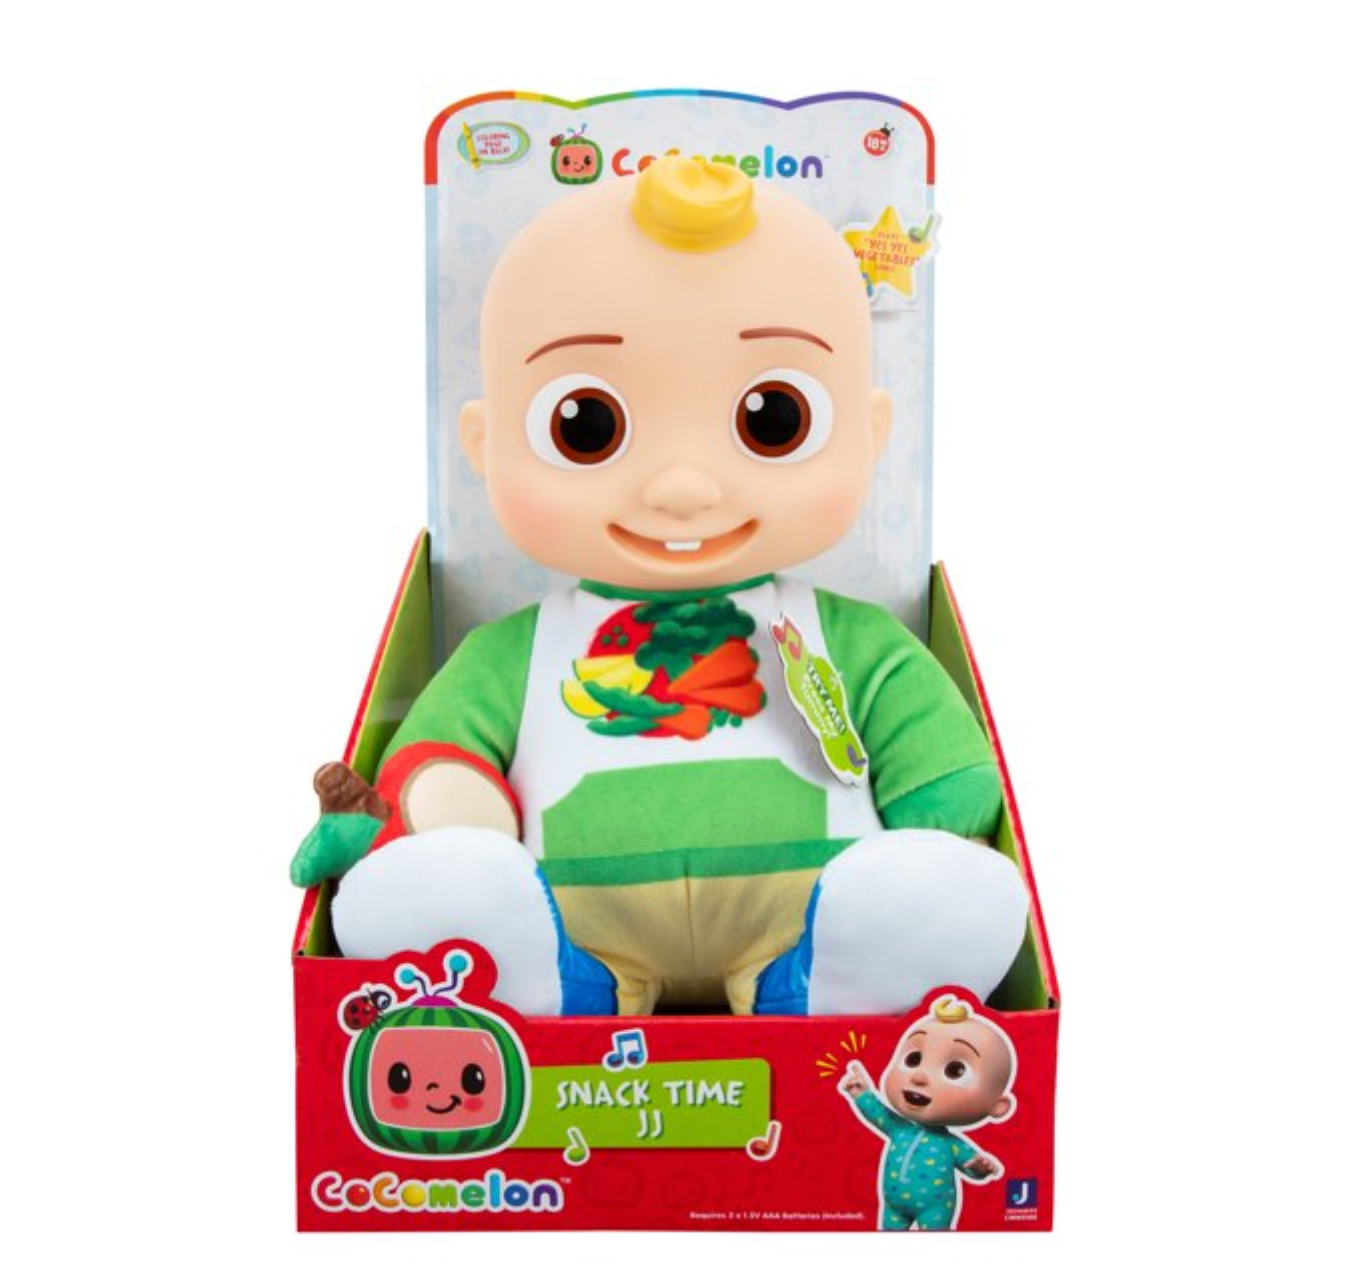 CoComelon Snack Time JJ Musical Yes Yes Vegetables Song Plush Doll New with Box